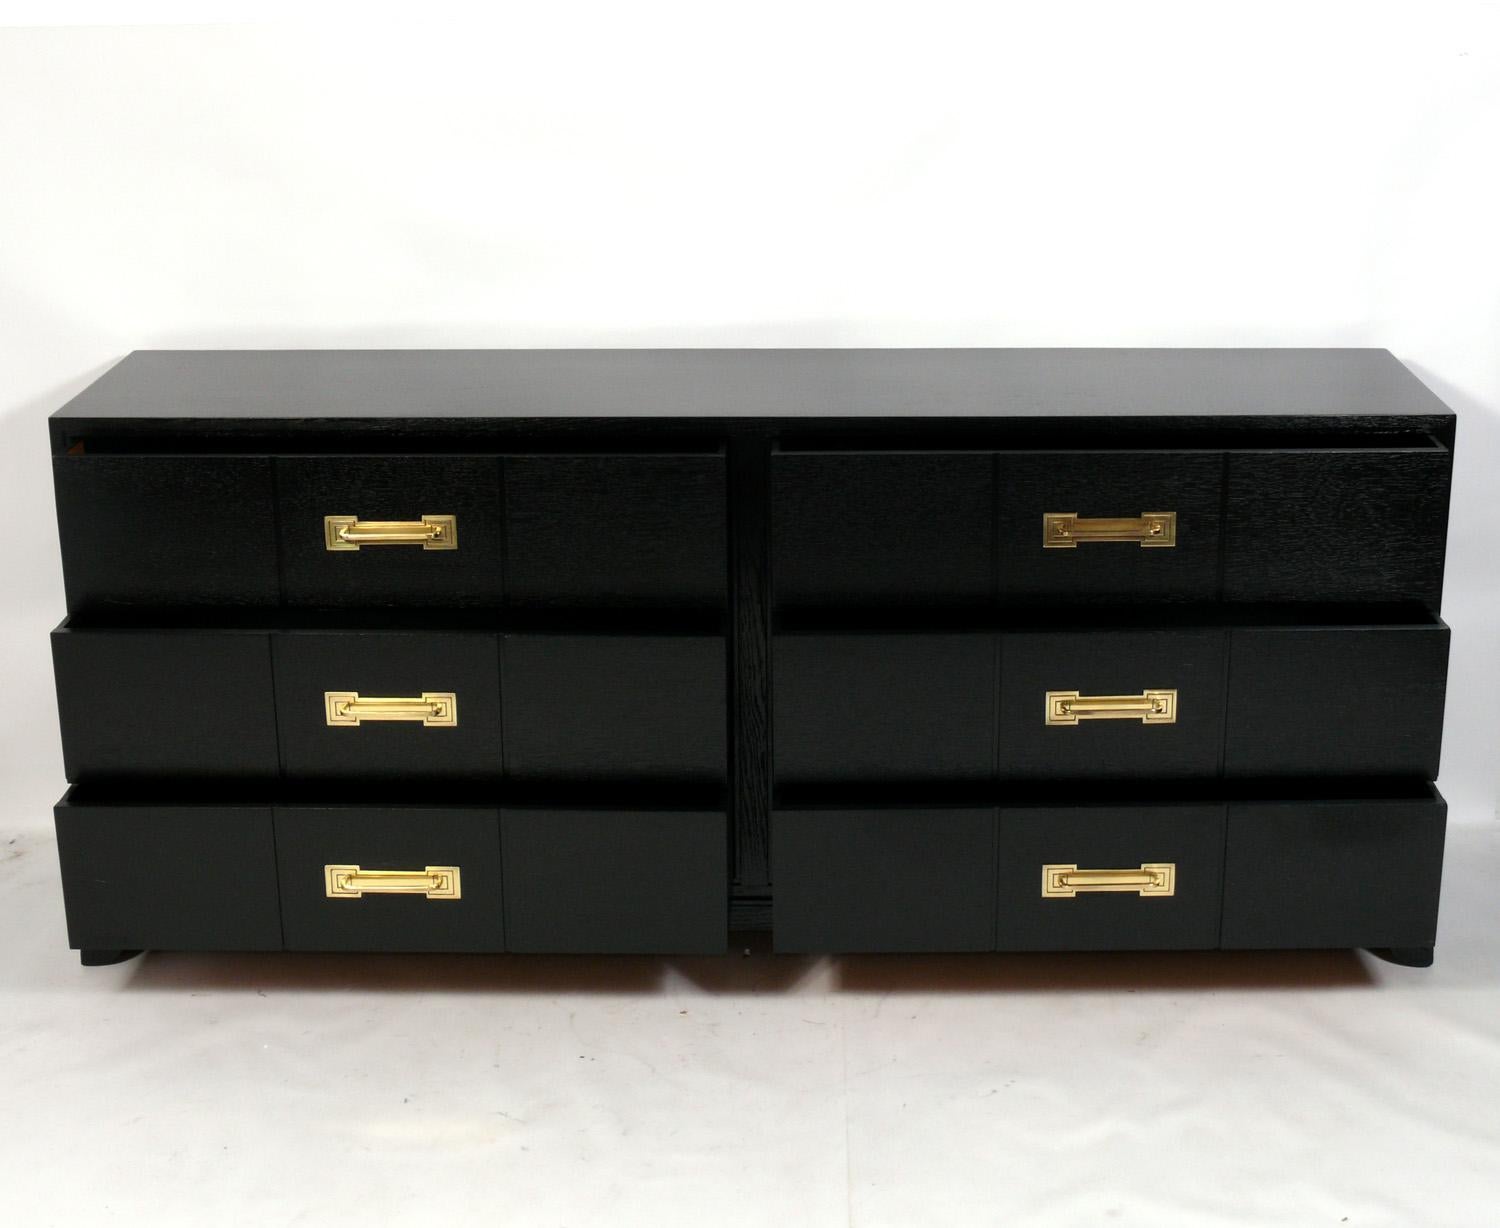 Elegant midcentury chest, designed by Tommi Parzinger for Charak Modern, American, circa 1950s. It has been completely restored, refinished in black lacquer and the brass hardware hand polished and lacquered. It is a versatile Size and can be used